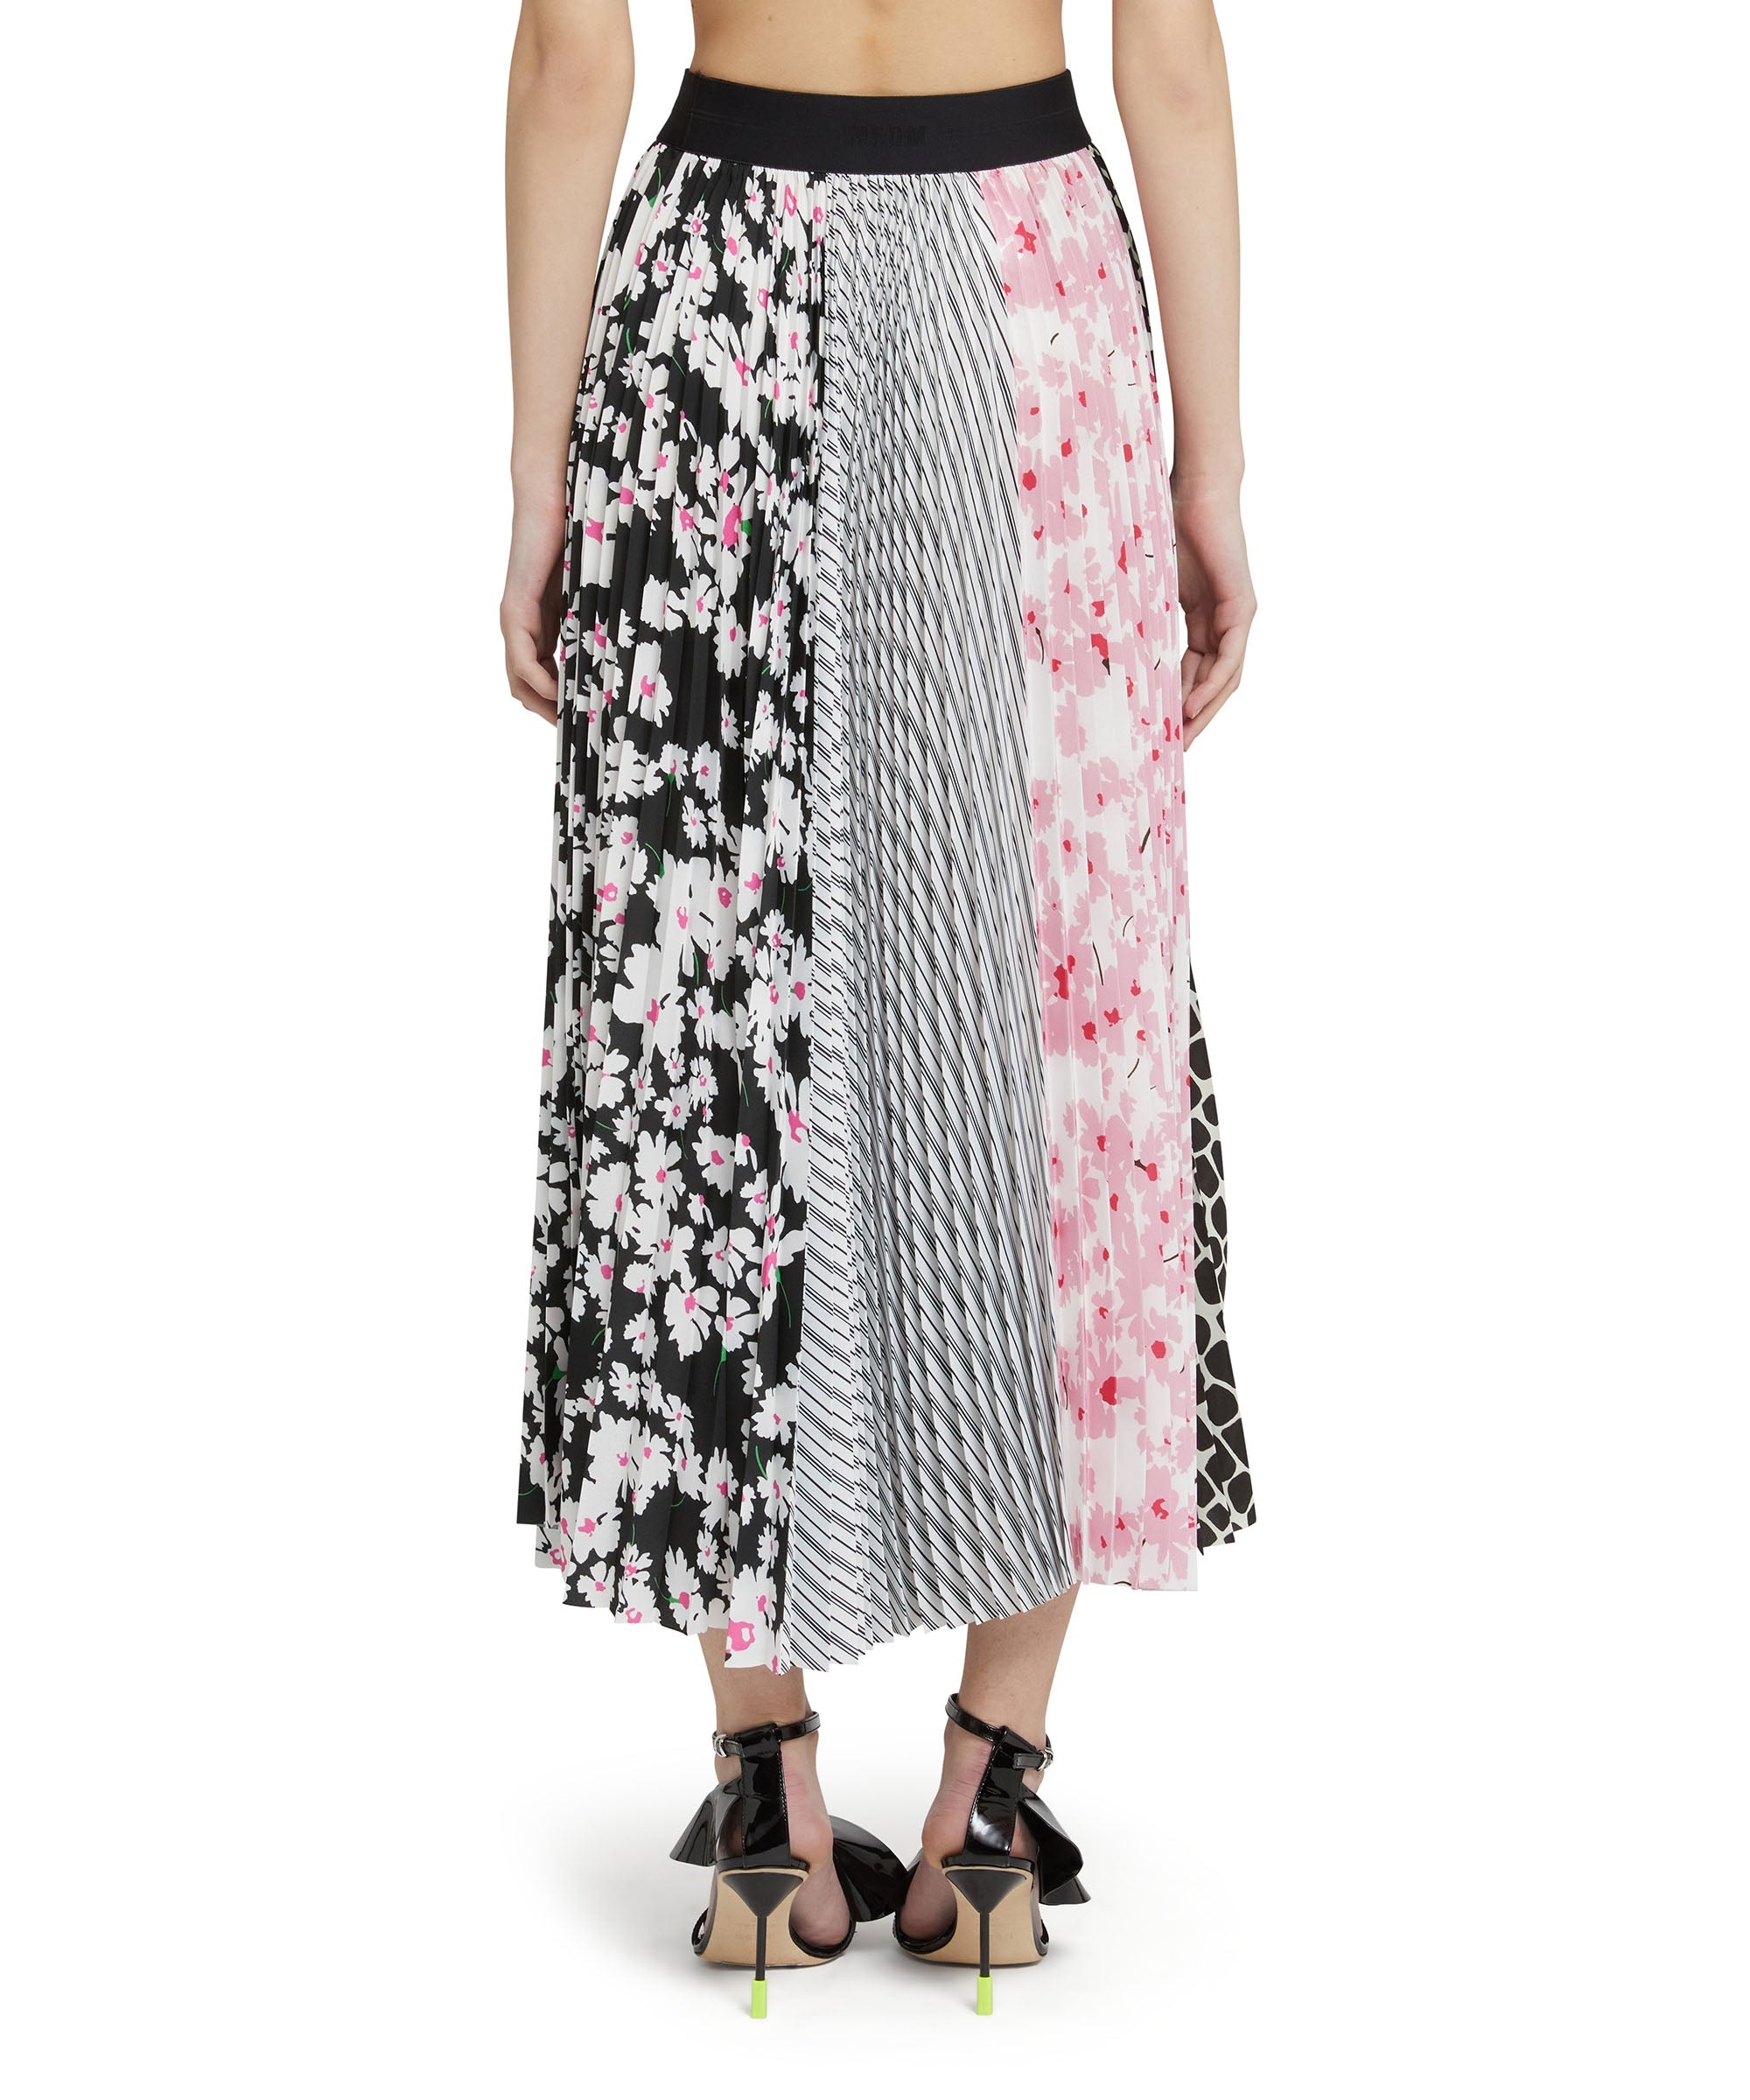 Long pleated skirt with patchwork print and elasticized waistband - 3